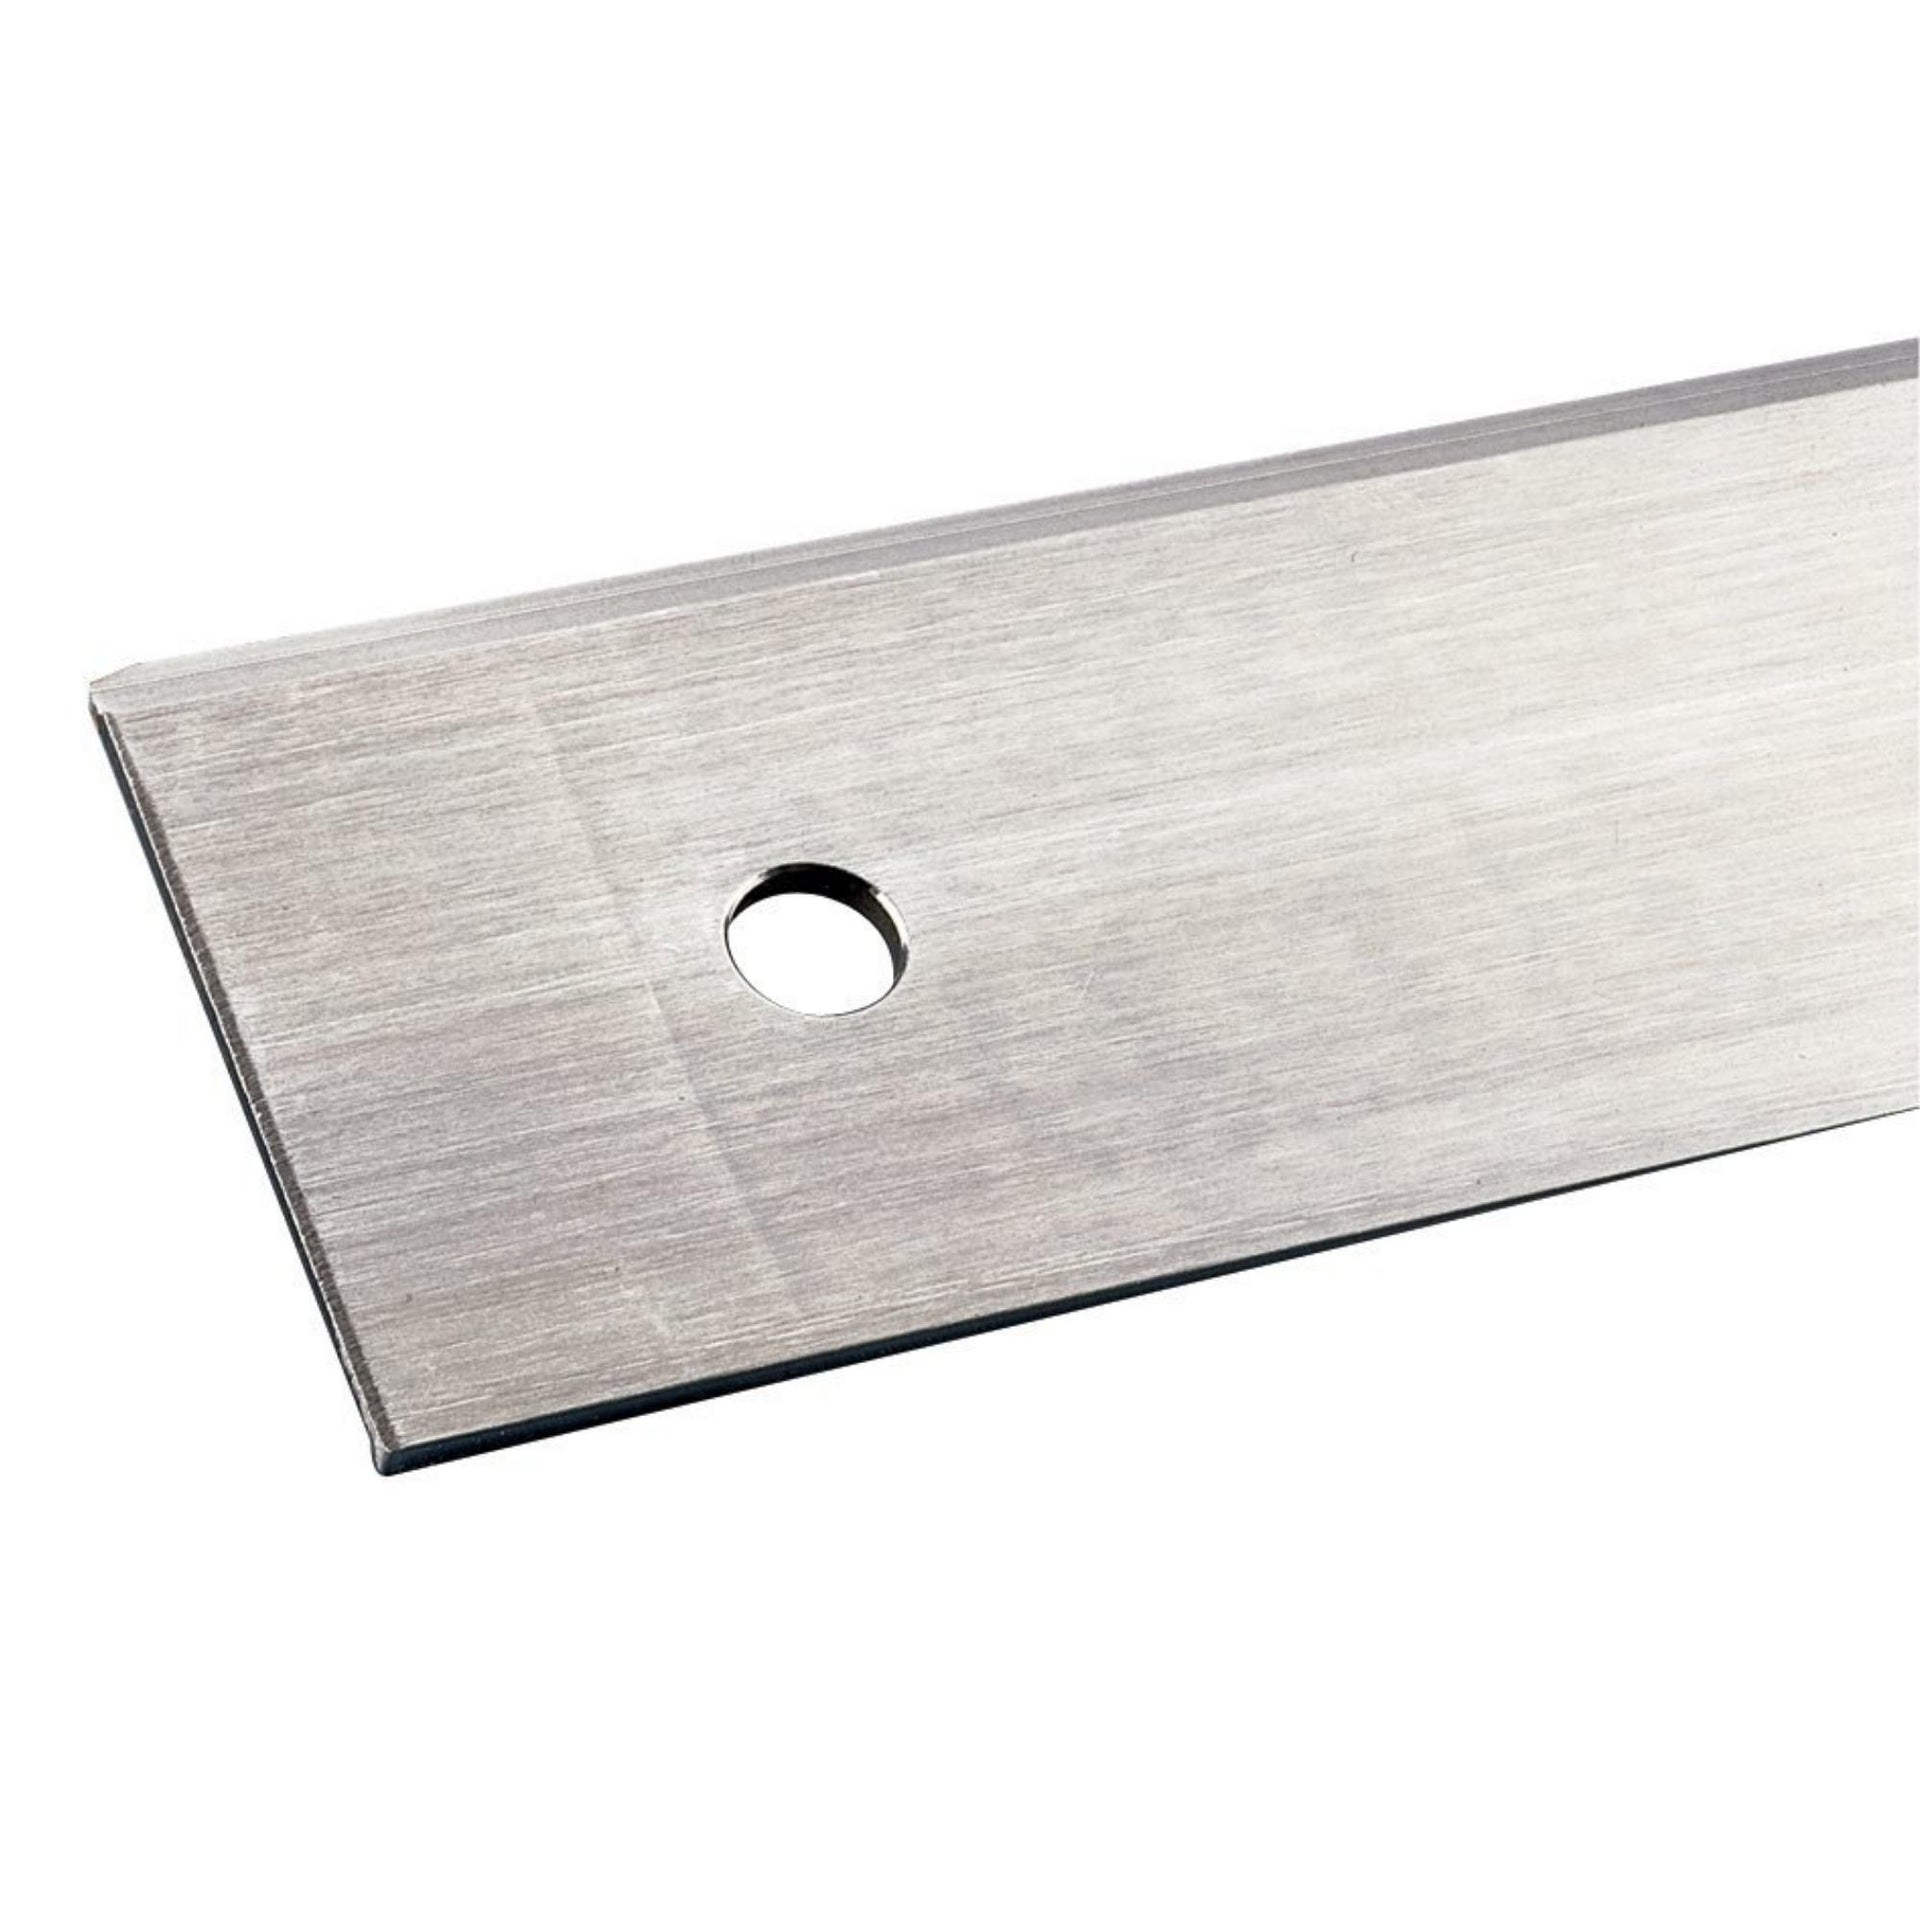 Stainless Straight-Edge Biscuit Cutter 2 1/3 inches